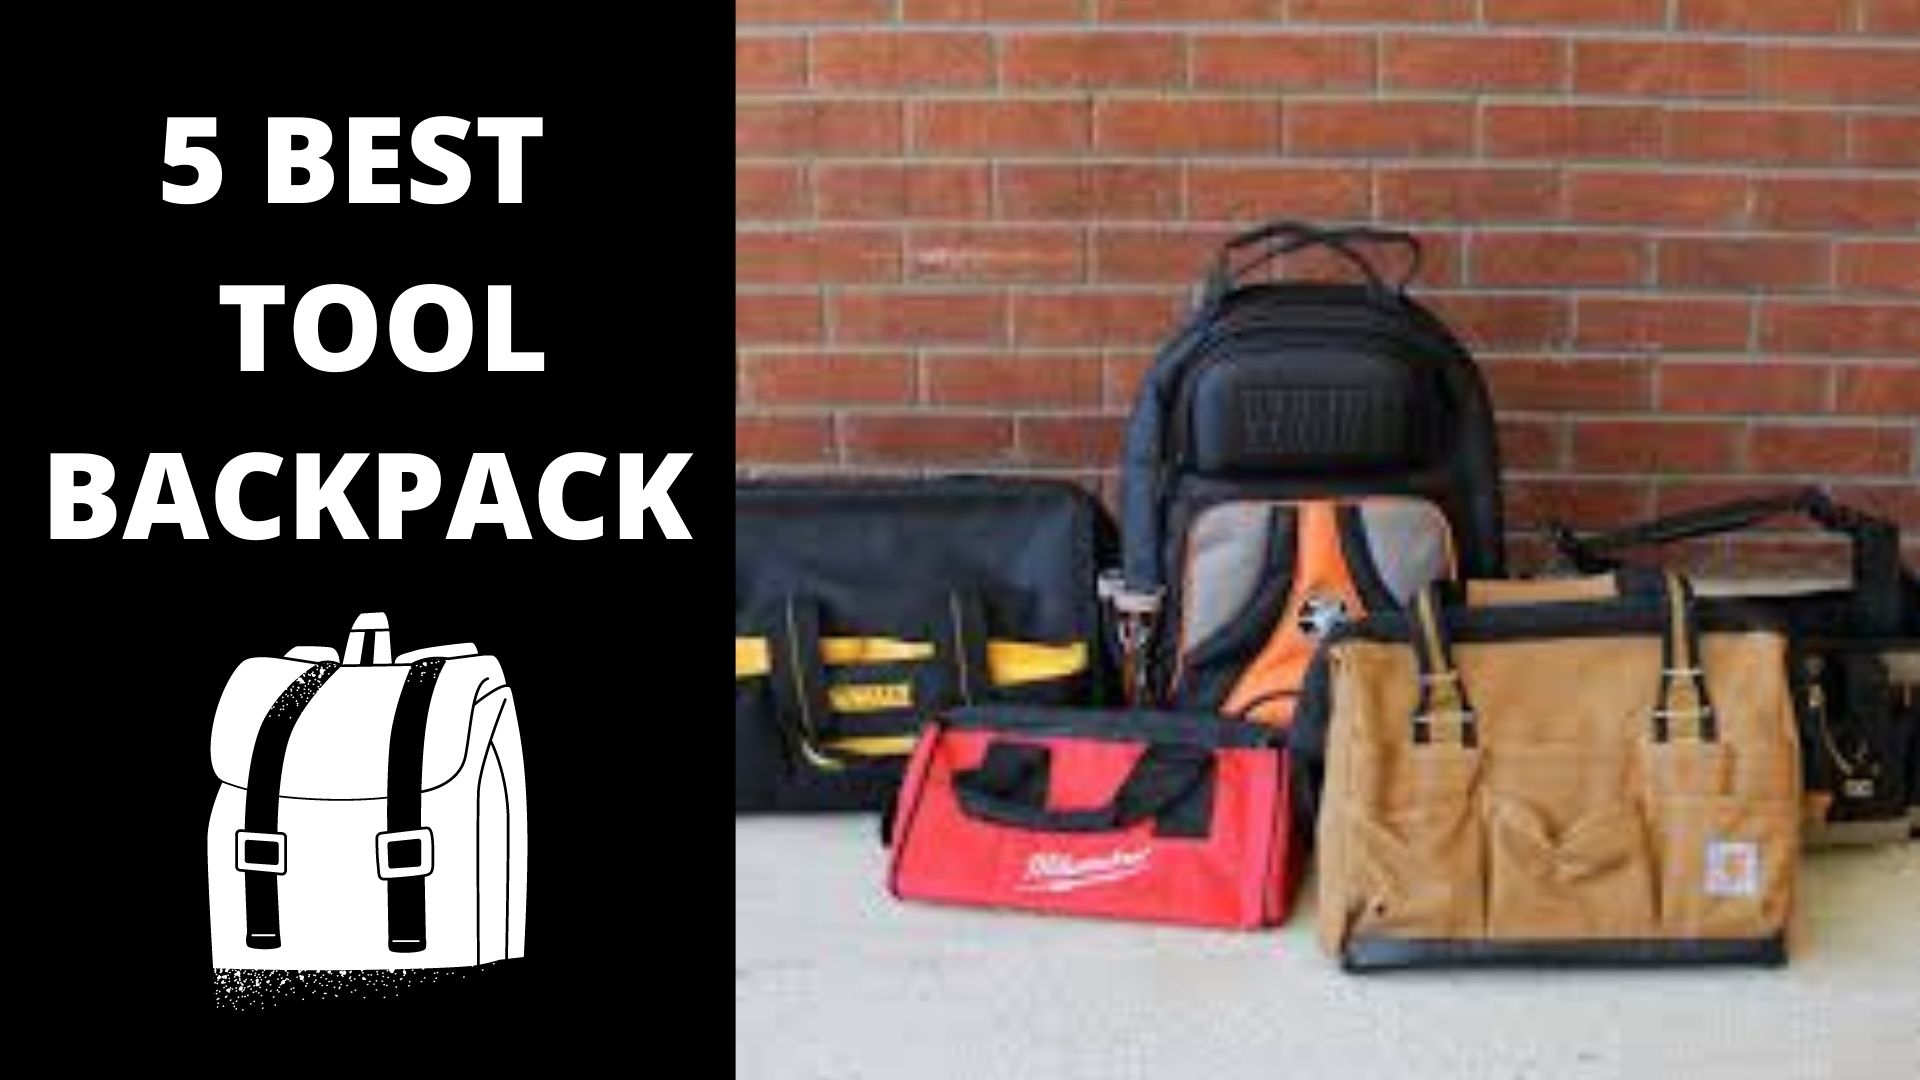 5 BEST CONSTRUCTION TOOL BACKPACK